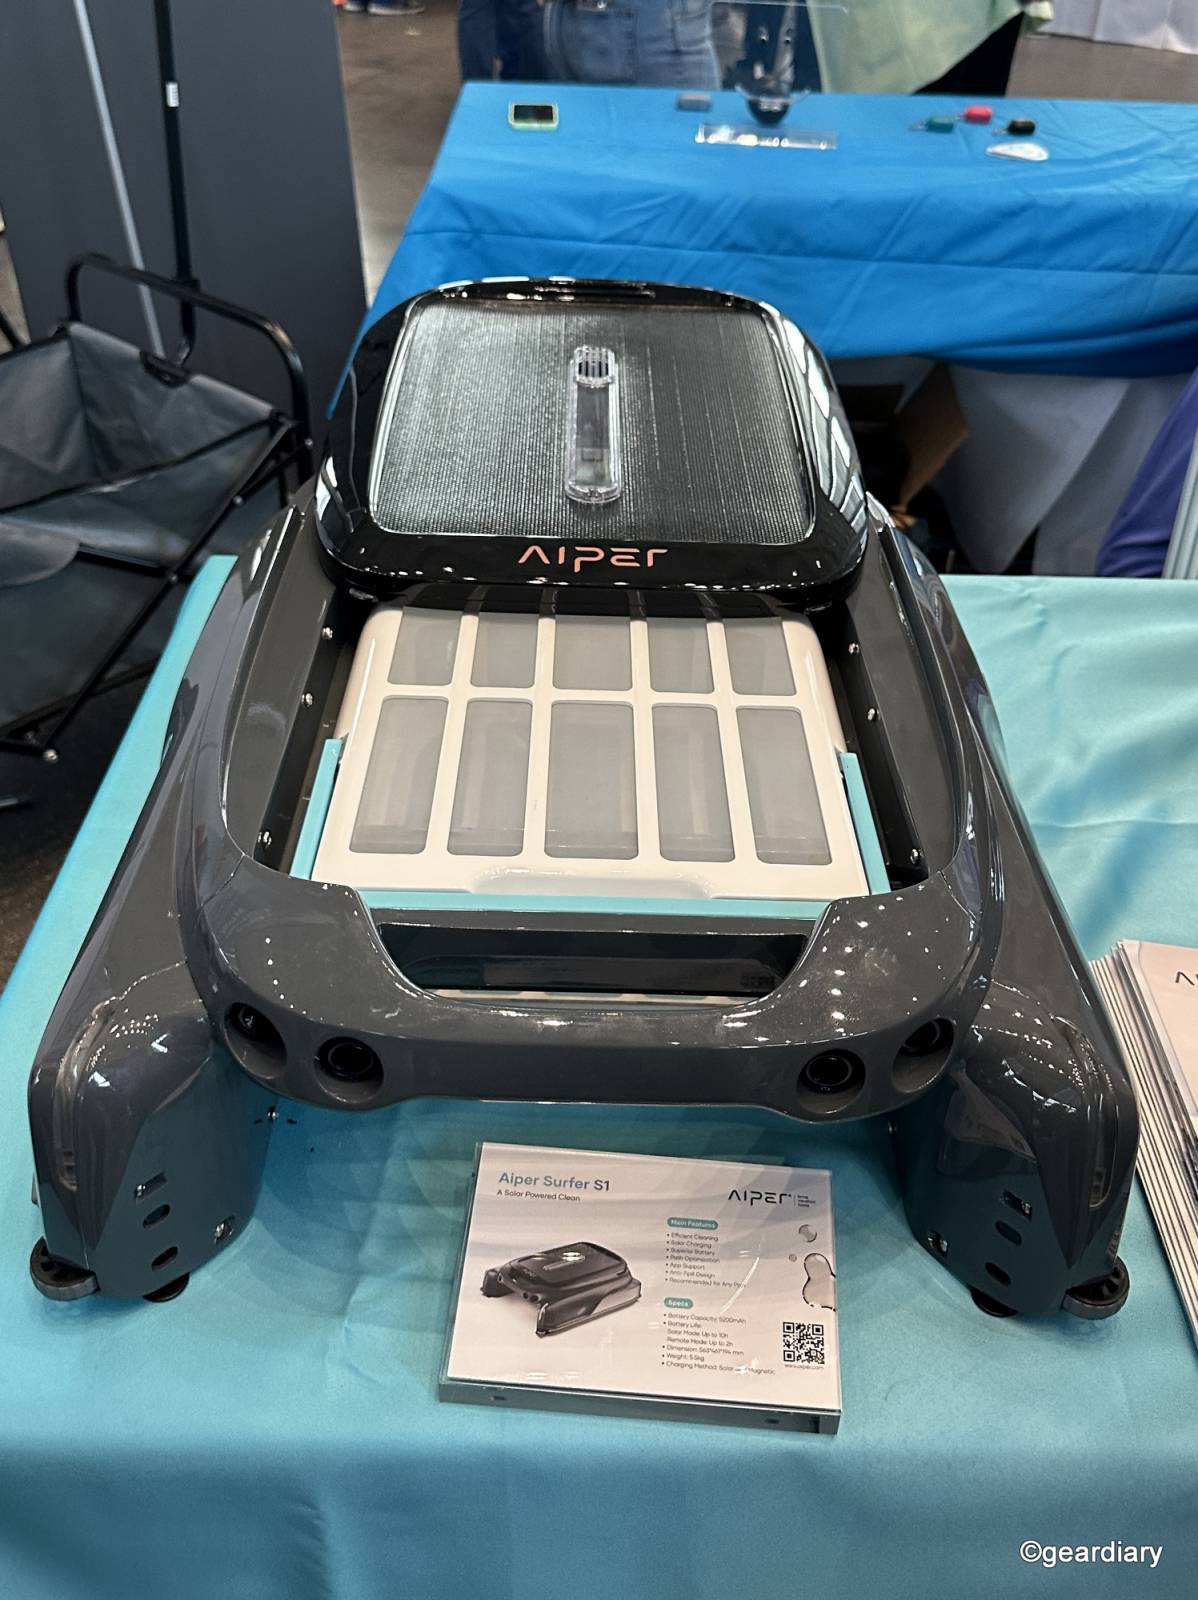 The Aiper Surfer S1 Solar Pool Skimmer at IFA's Showstopper's Event